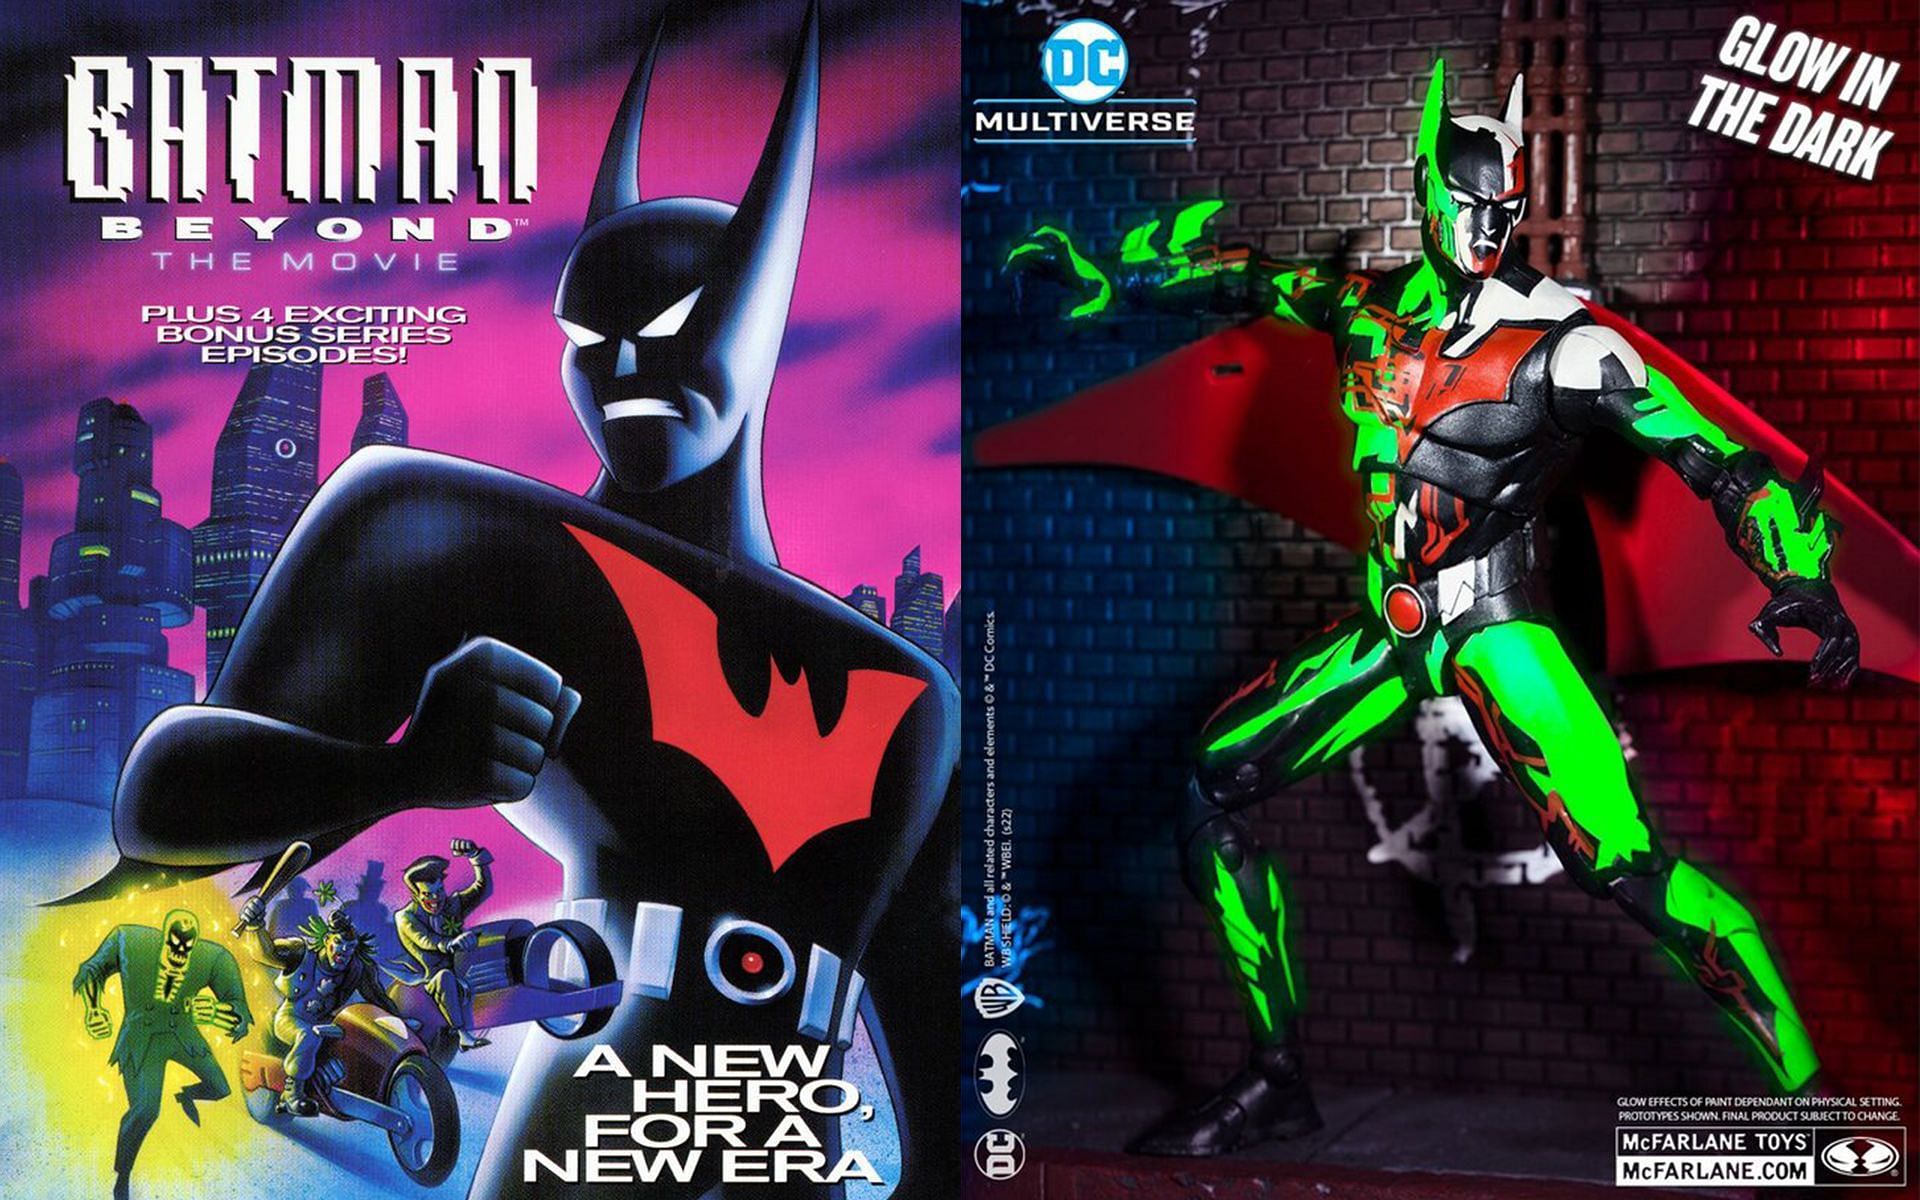 McFarlane Toys x Batman Beyond: How to pre-order, expected release date,  and more about the DC Multiverse figure